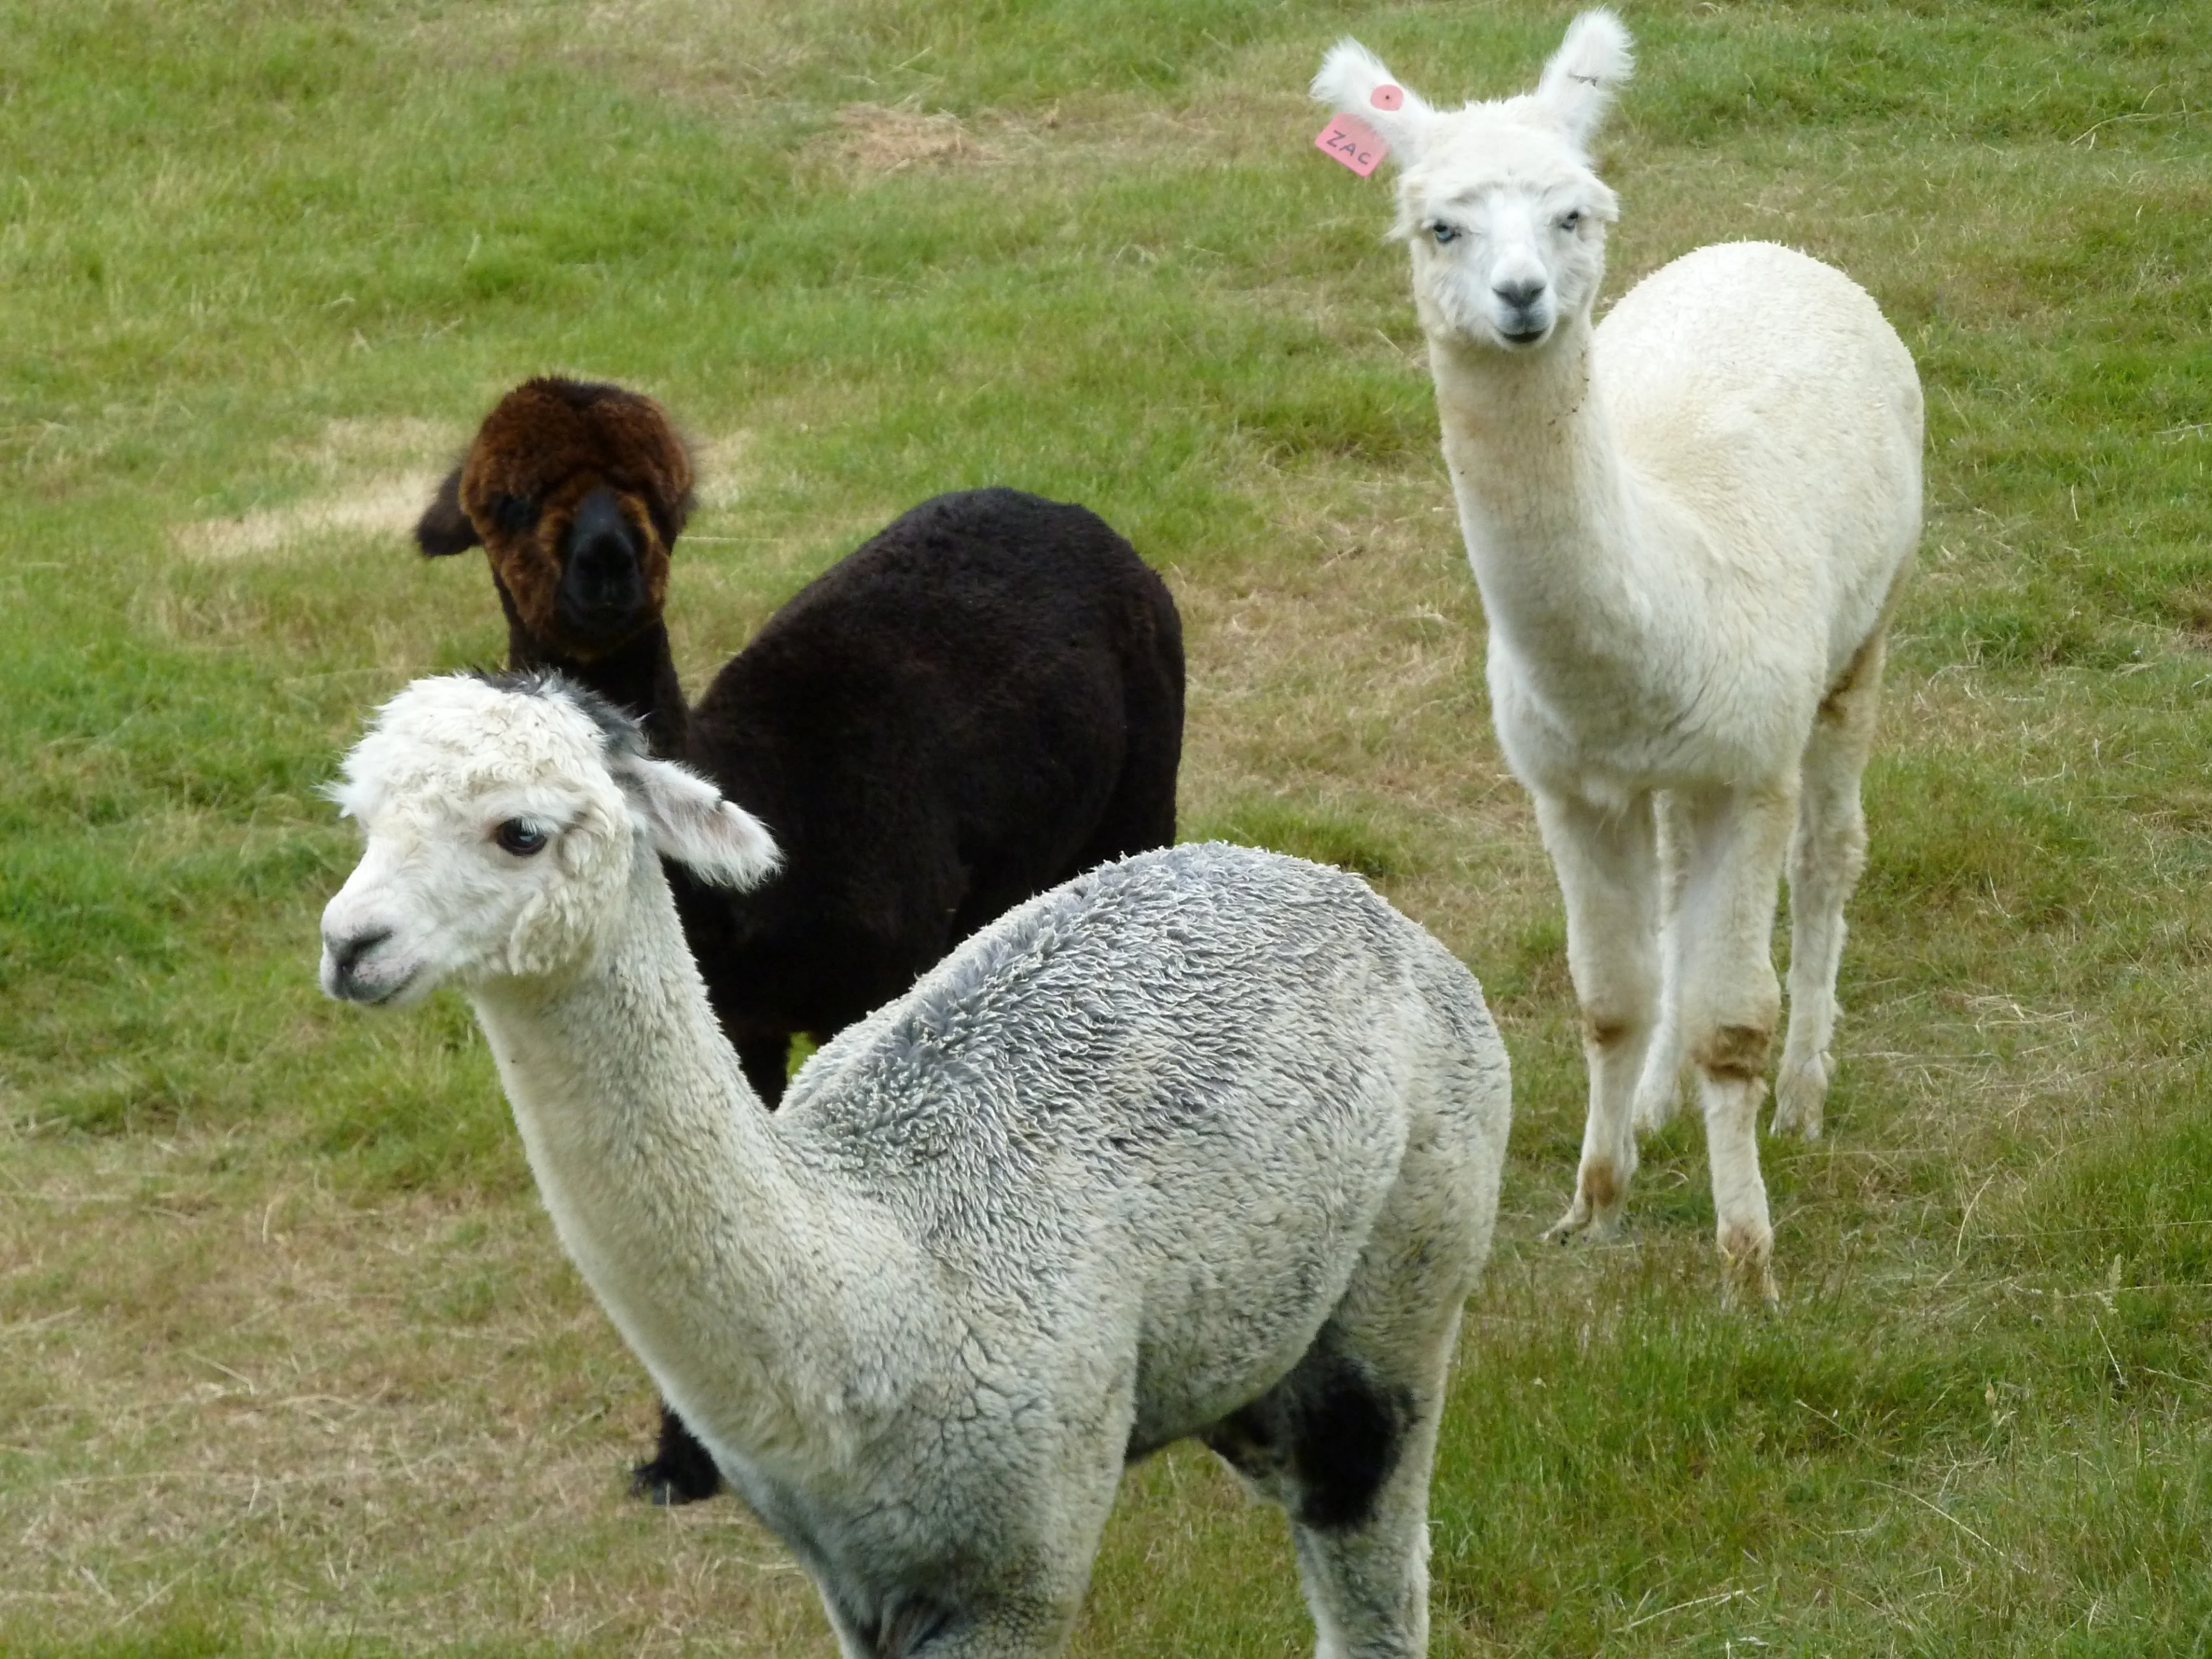 Three alpacas (two white and one brown) standing on the grass at Creswick Woollen Mills, Creswick